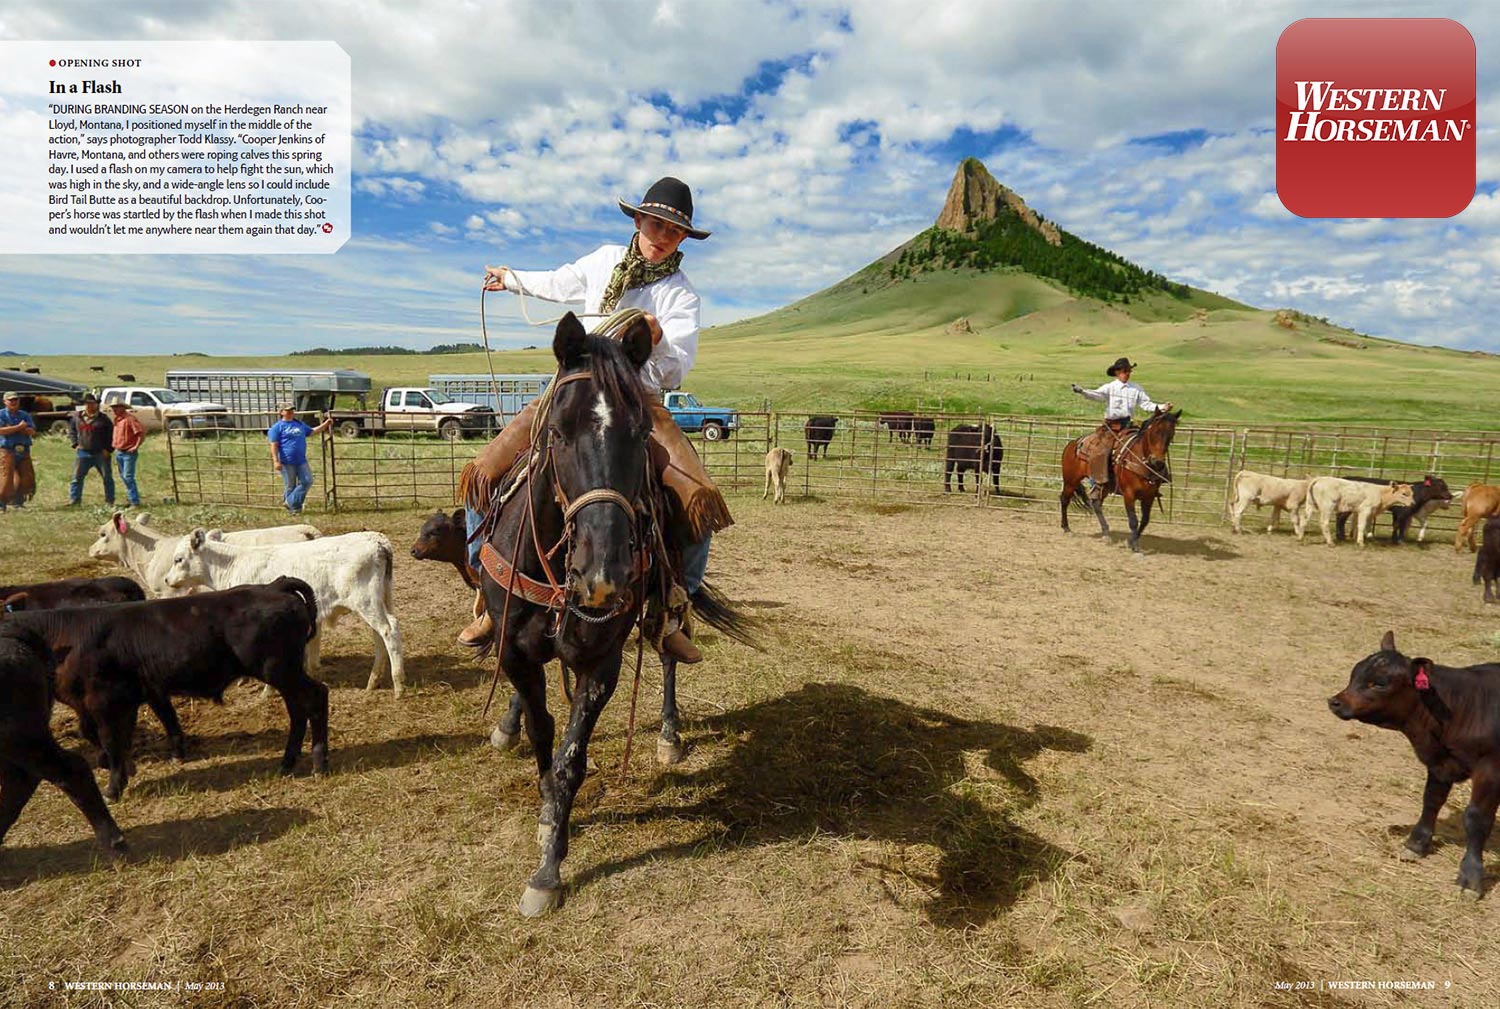 My photo of a young cowboy roping cattle in the corral near Lloyd, Montana is featured as a two-page spread in Western Horseman magazine.&nbsp;→ License Photo